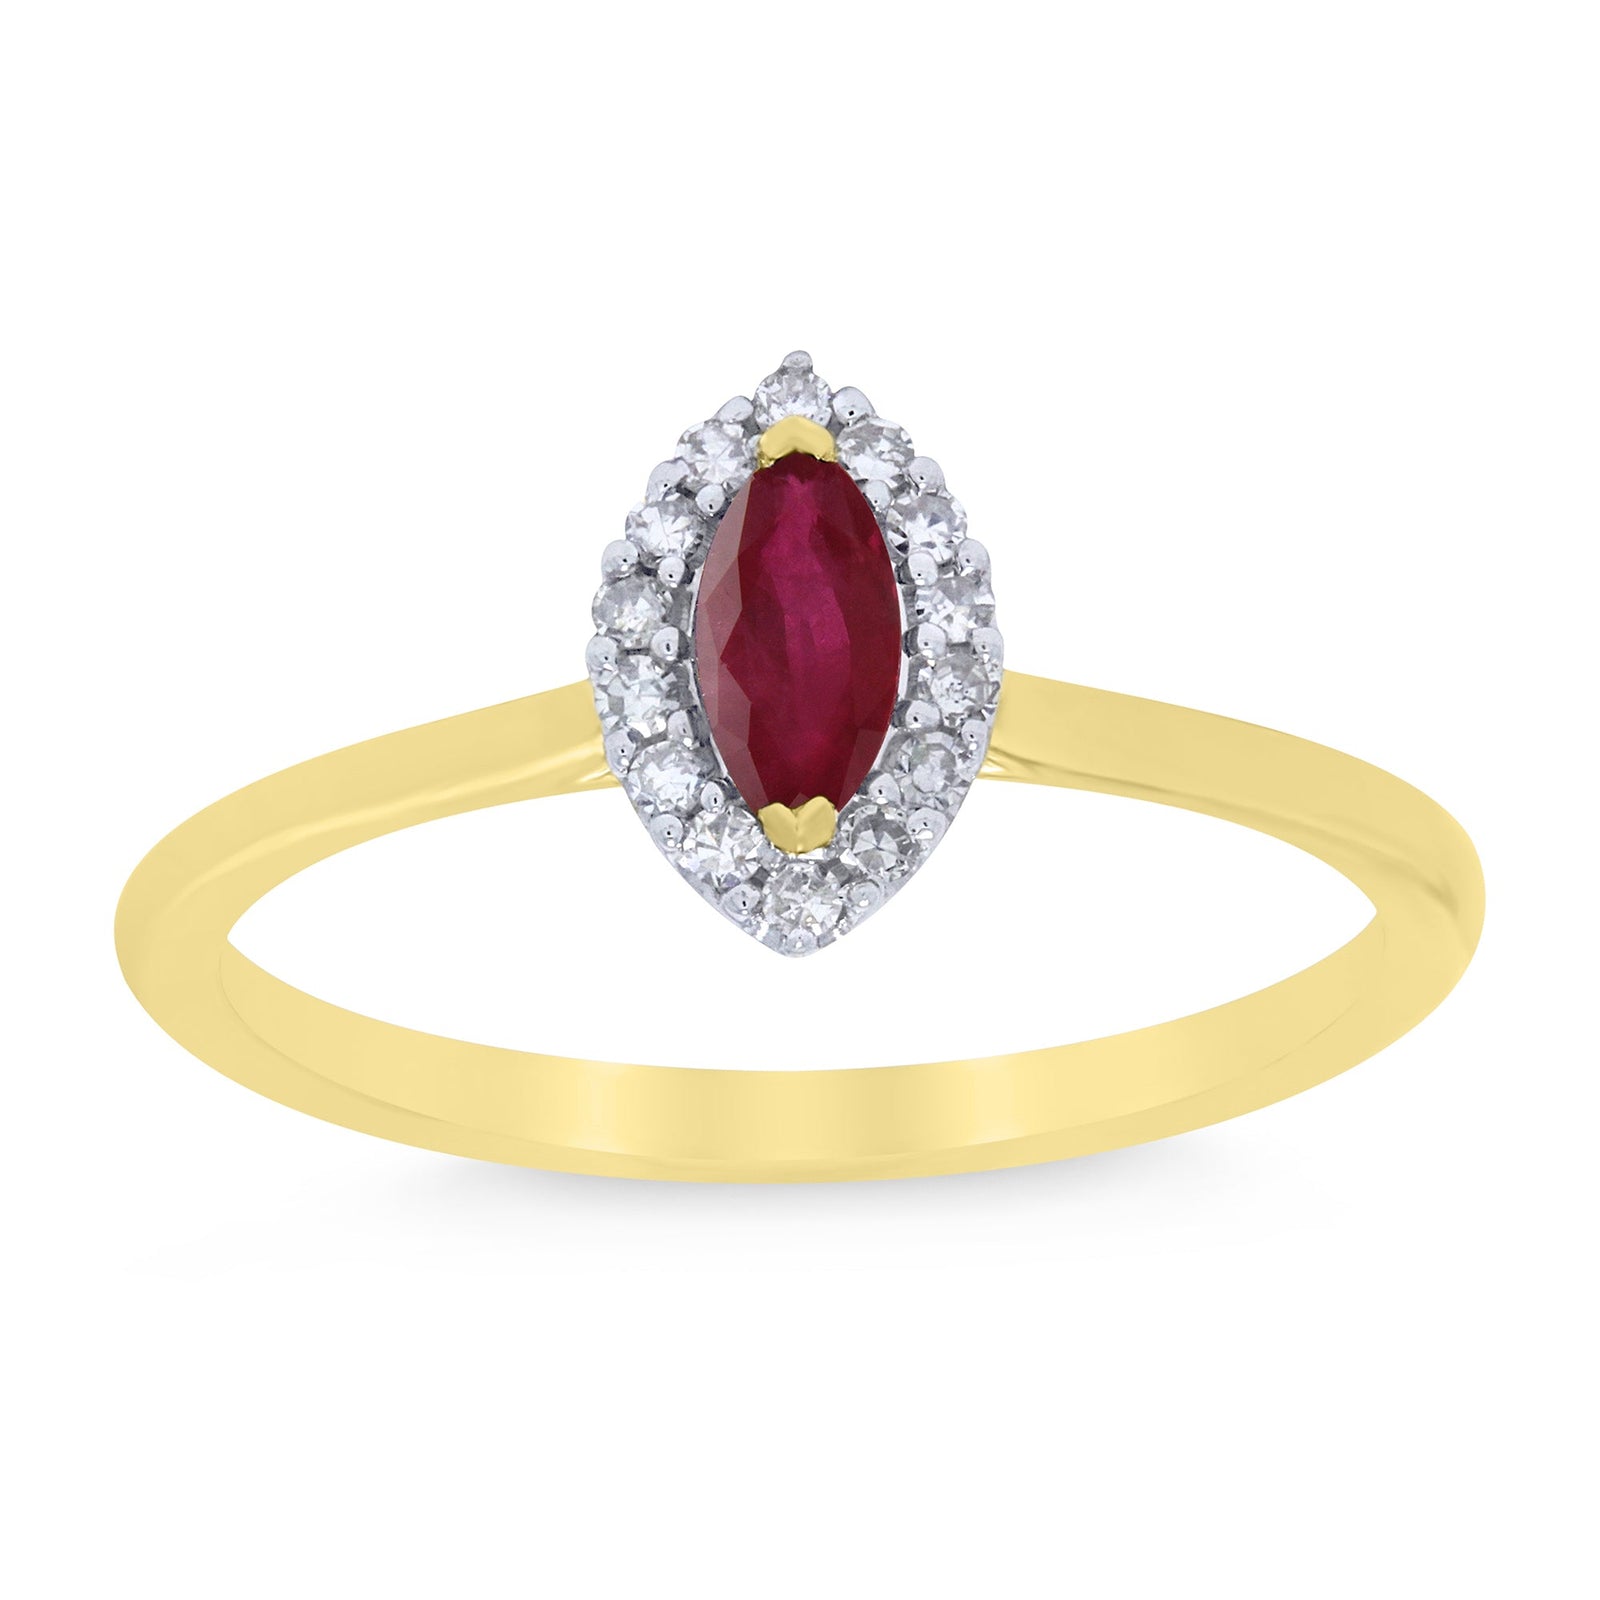 9ct gold 5x3mm marquise shape ruby & diamond cluster ring 0.10ct